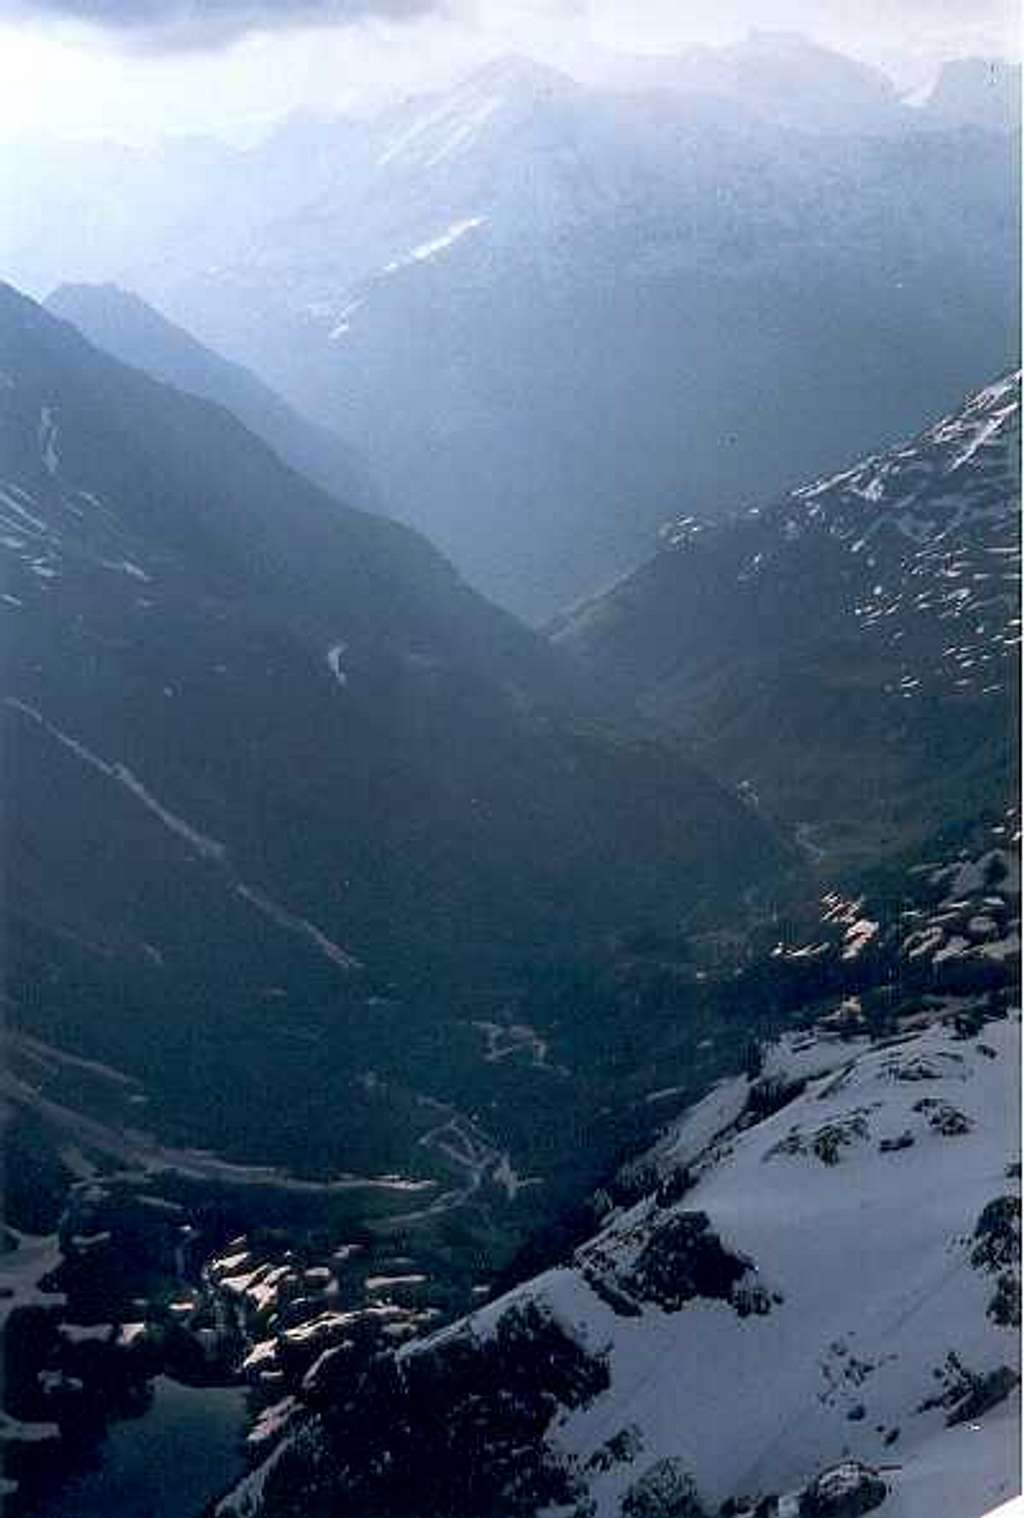 The Oussoue valley seen during the ascent to the Tapou peaks